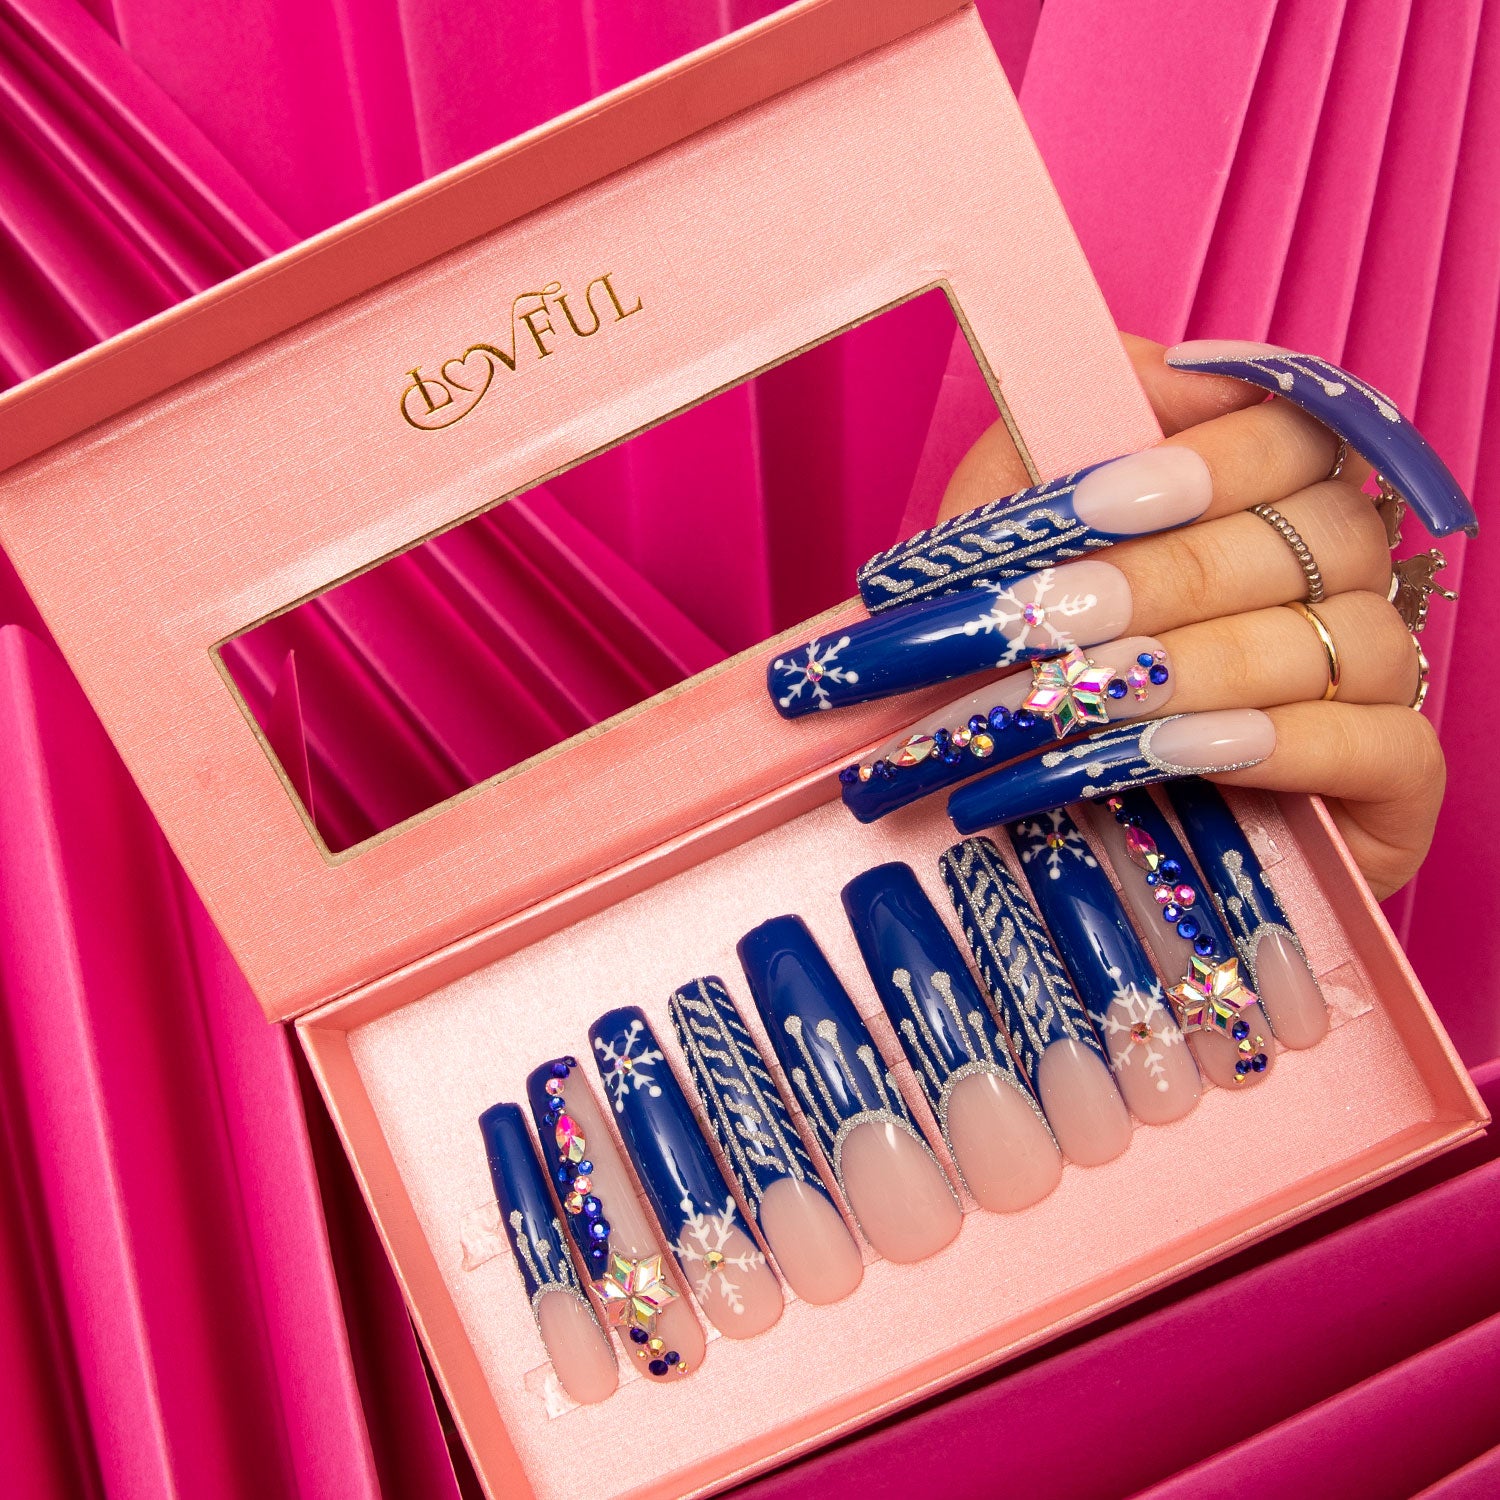 Lovful Snow Waltz press-on nails with blue jewelry-colored French tips and white snowflakes in a pink box. Hand showcasing the nails against a pink fabric background.